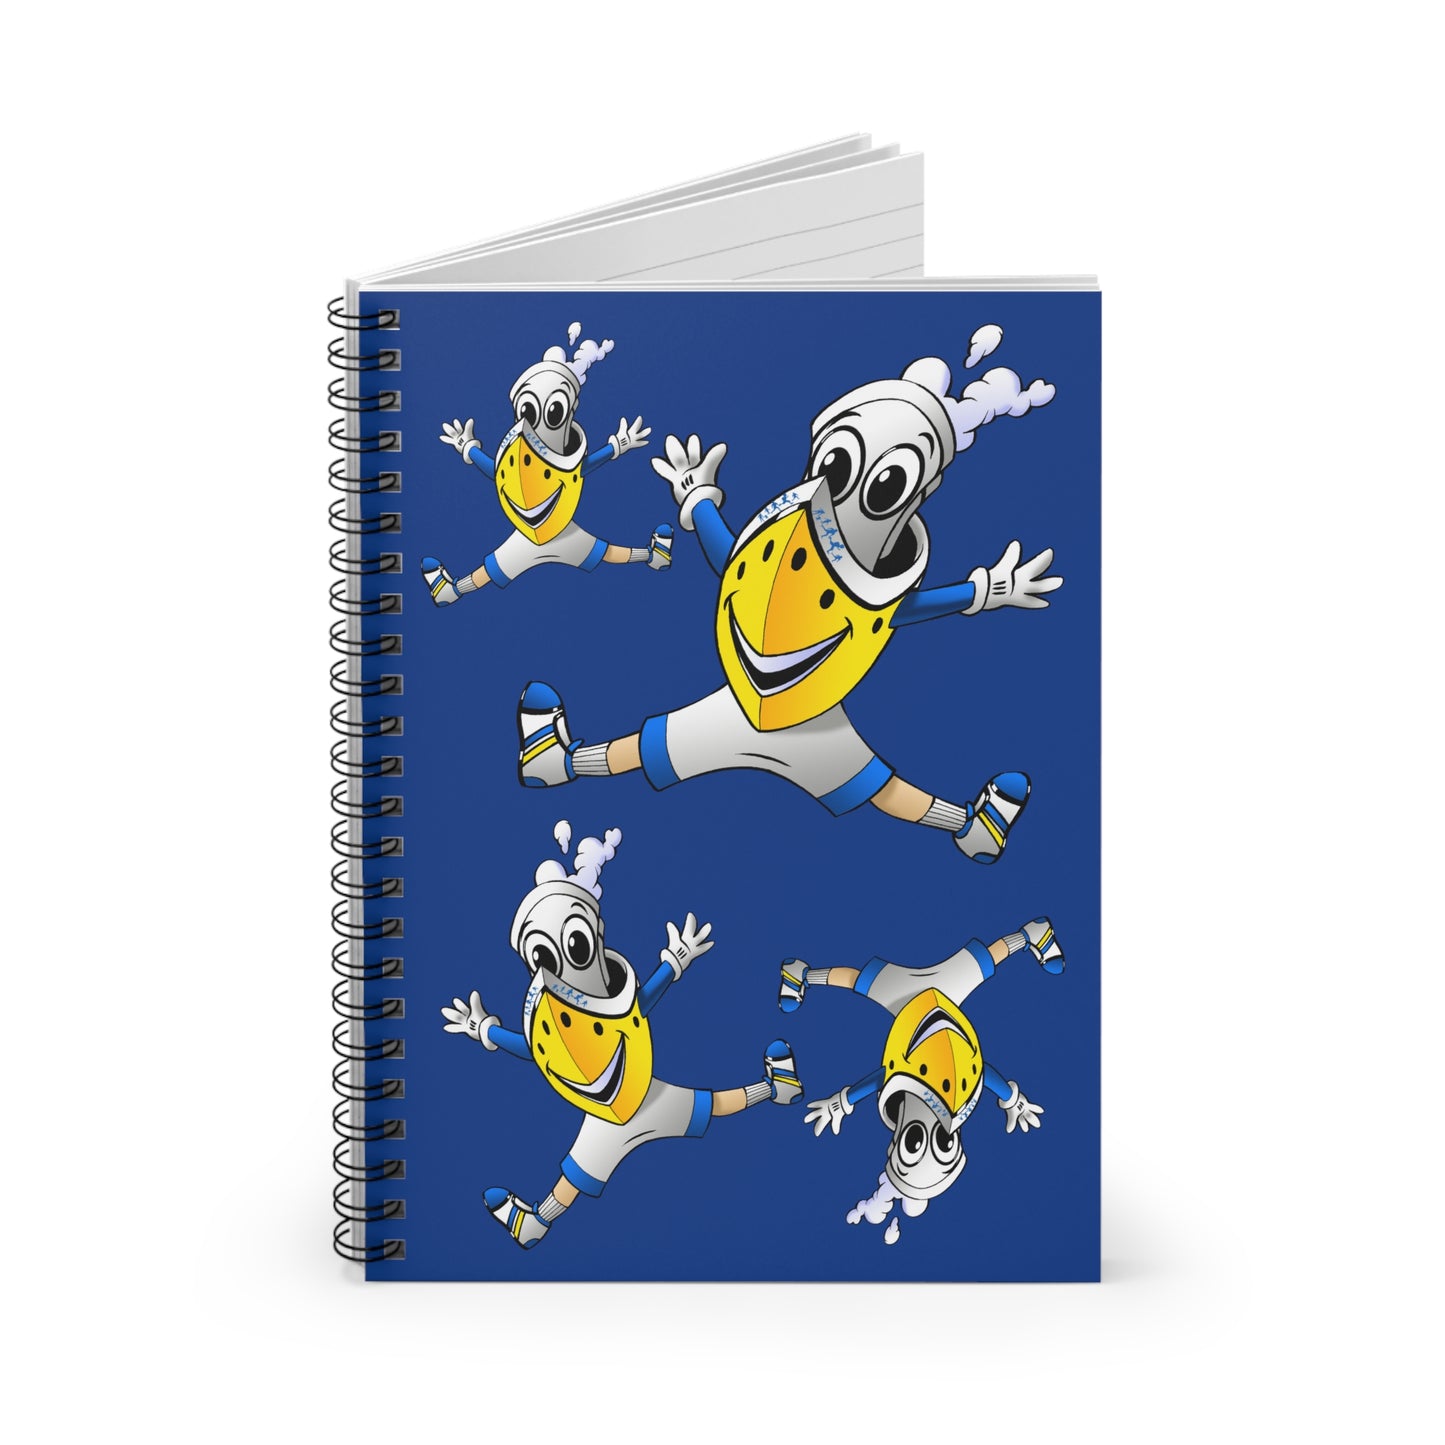 BUDDY CRUISE Buddy Blue Spiral Notebook - Ruled Line - Great for Journaling & Drawing!